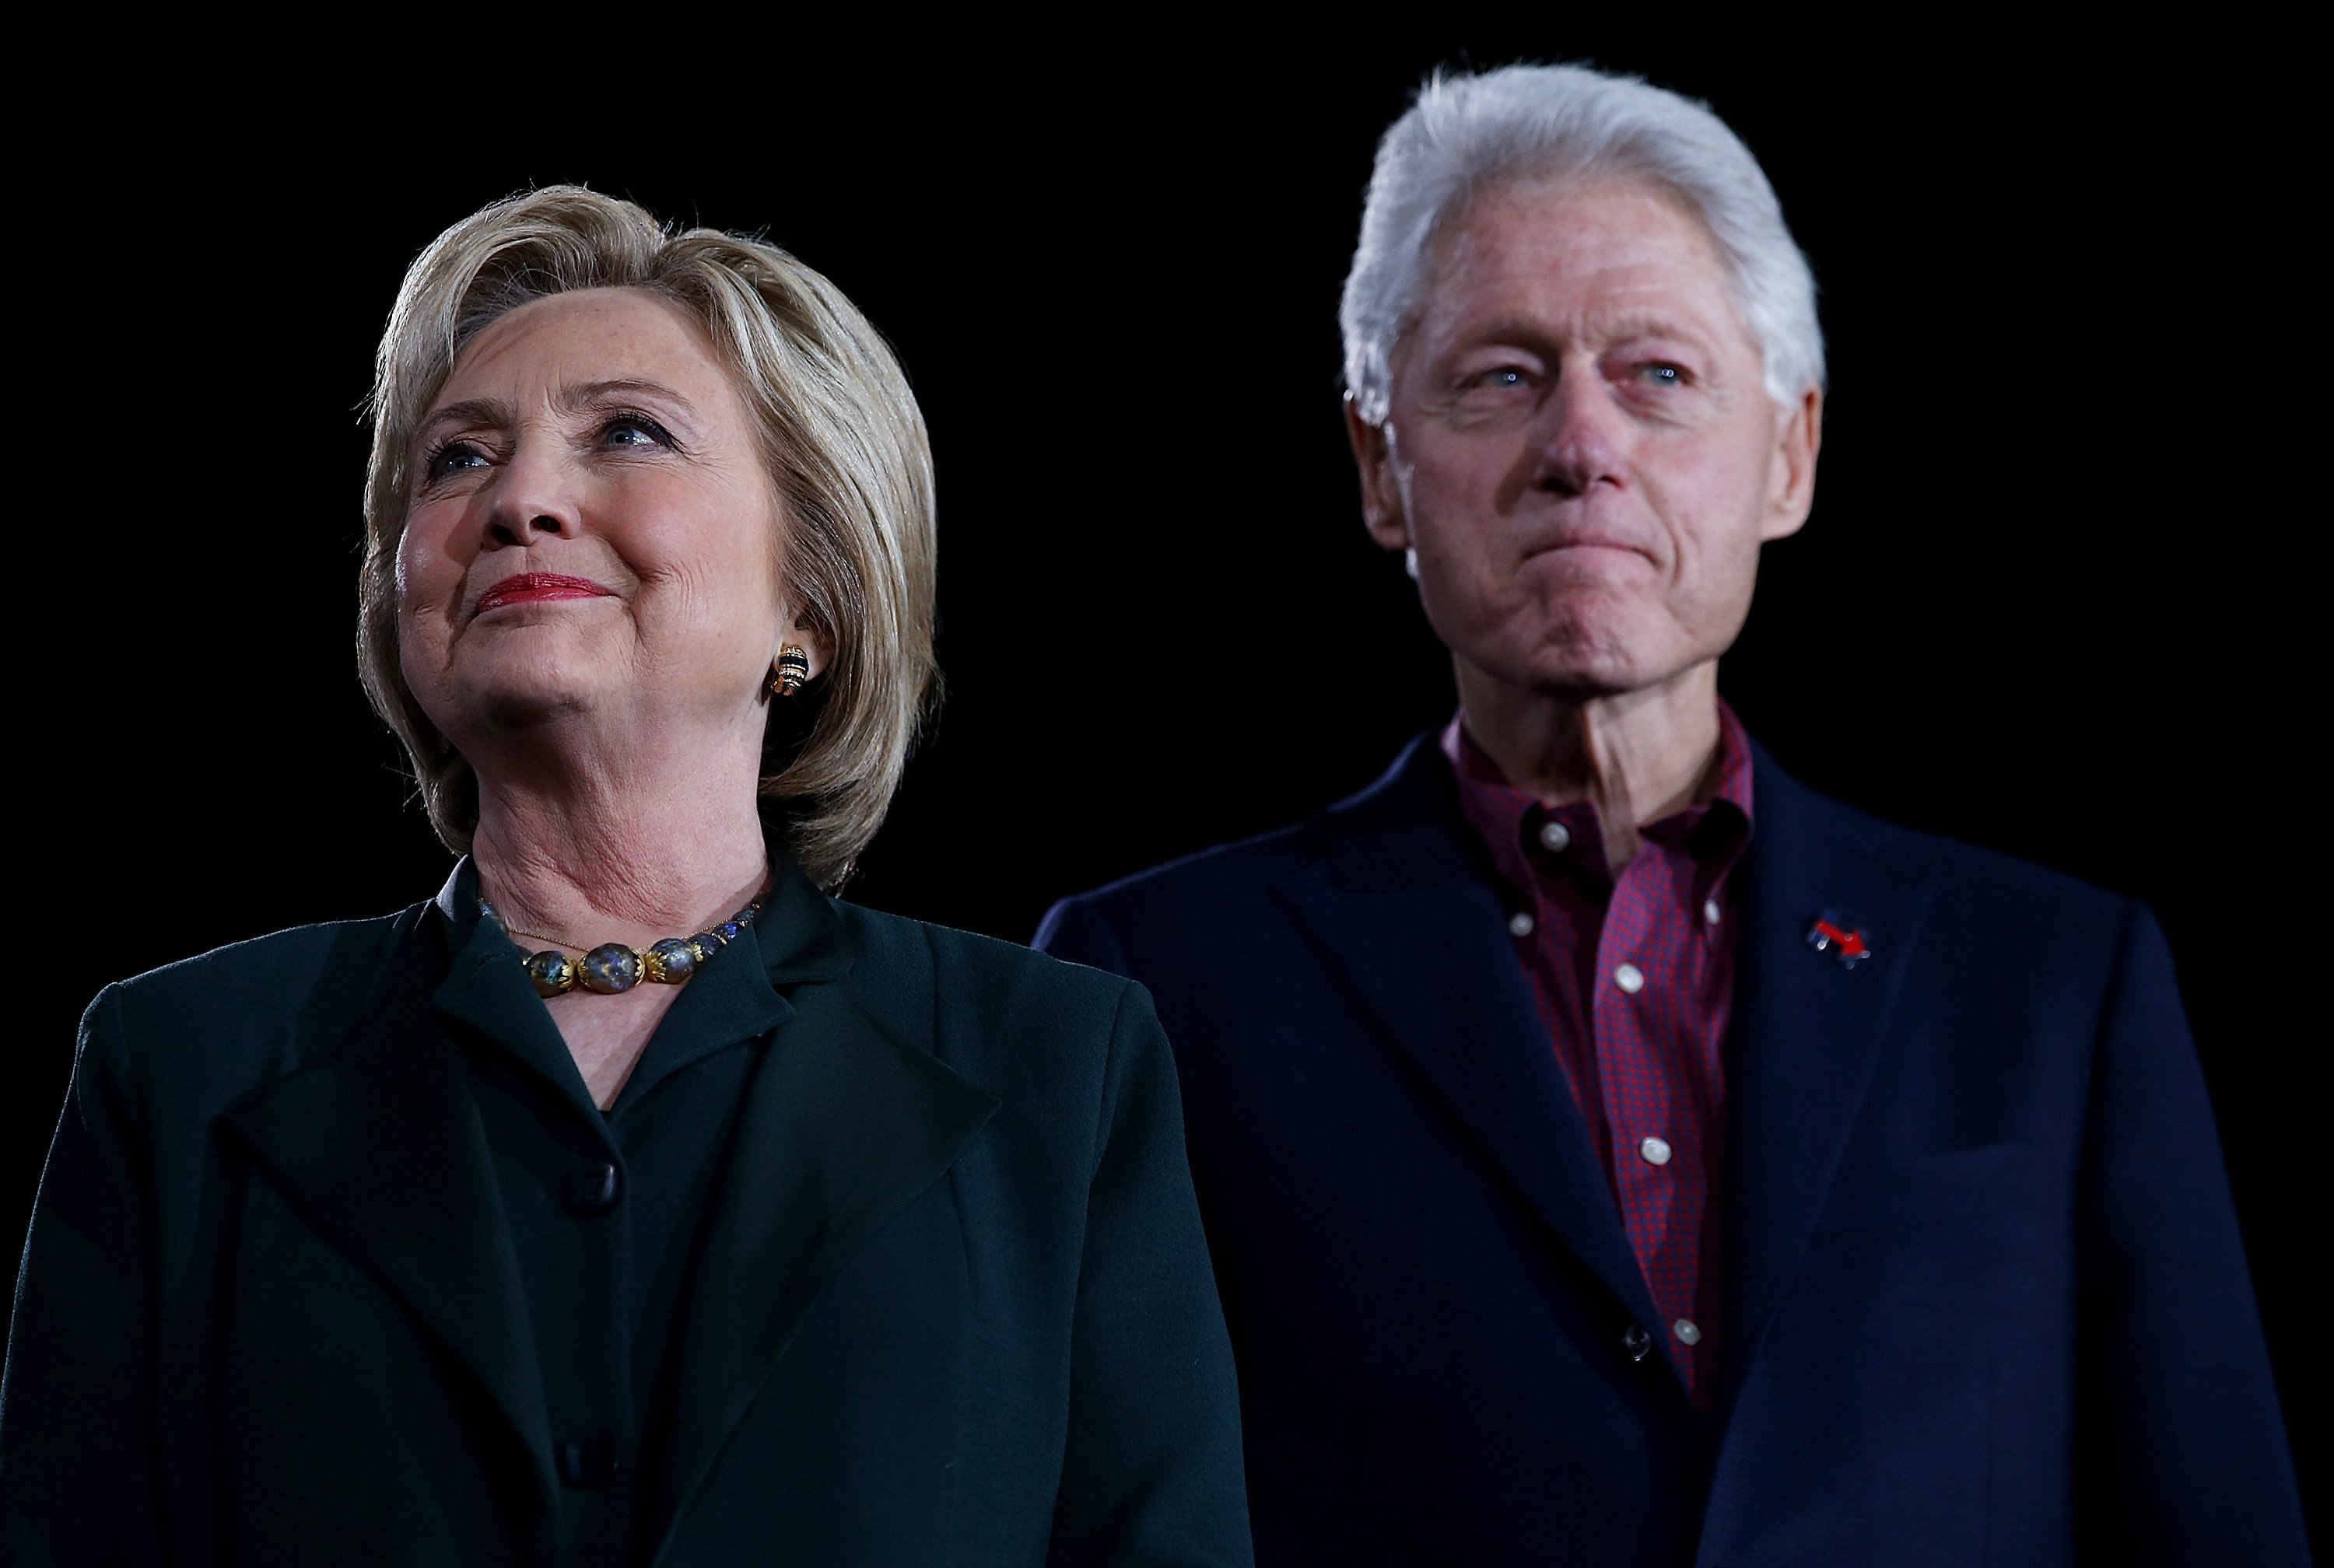 Hillary and Bill Clinton at a 'Get Out The Caucus' at the Clark County Government Center on February 19, 2016 in Las Vegas, Nevada | Photo: Getty Images